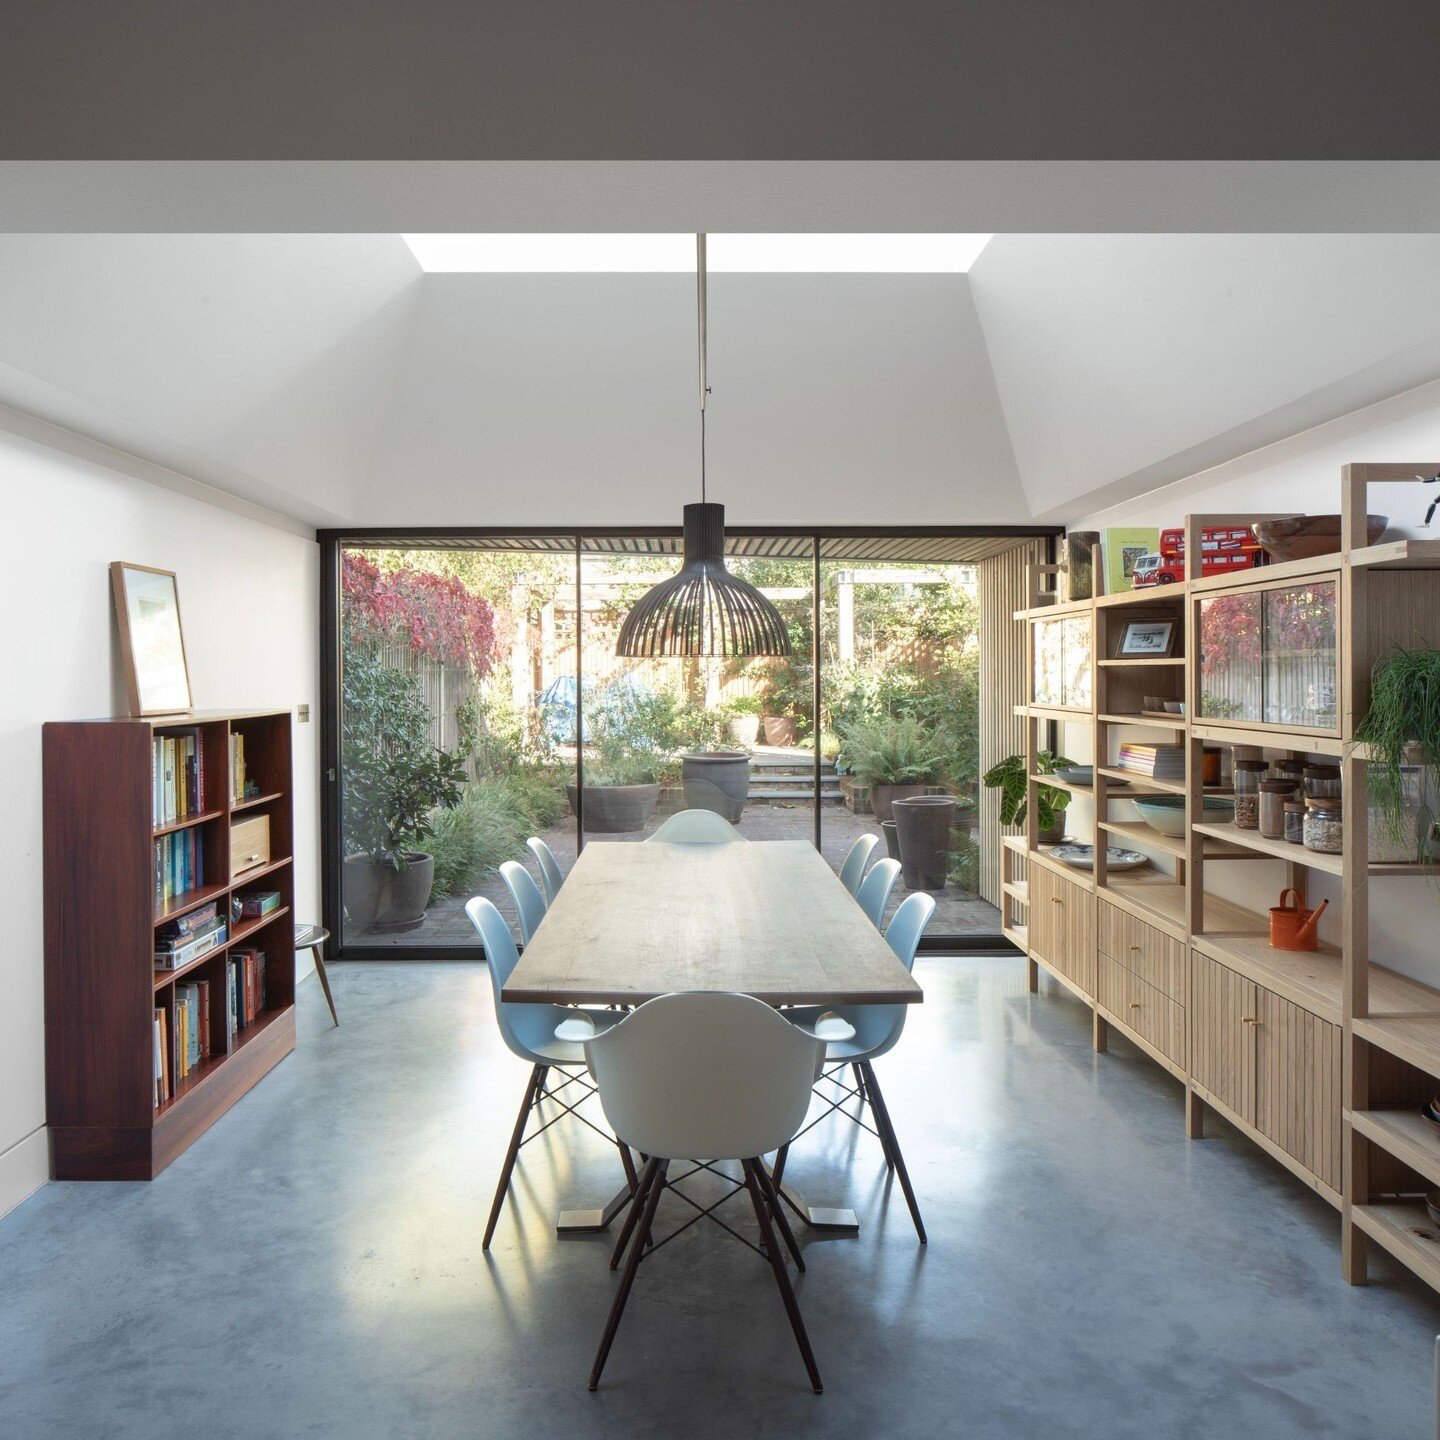 Located in Herne Hill, South London, Elfindale Road is a unique extension and renovation to a terraced period property. The unique roof form creates a vaulted internal space which is capped with a frameless glass rooflight to increase the natural day